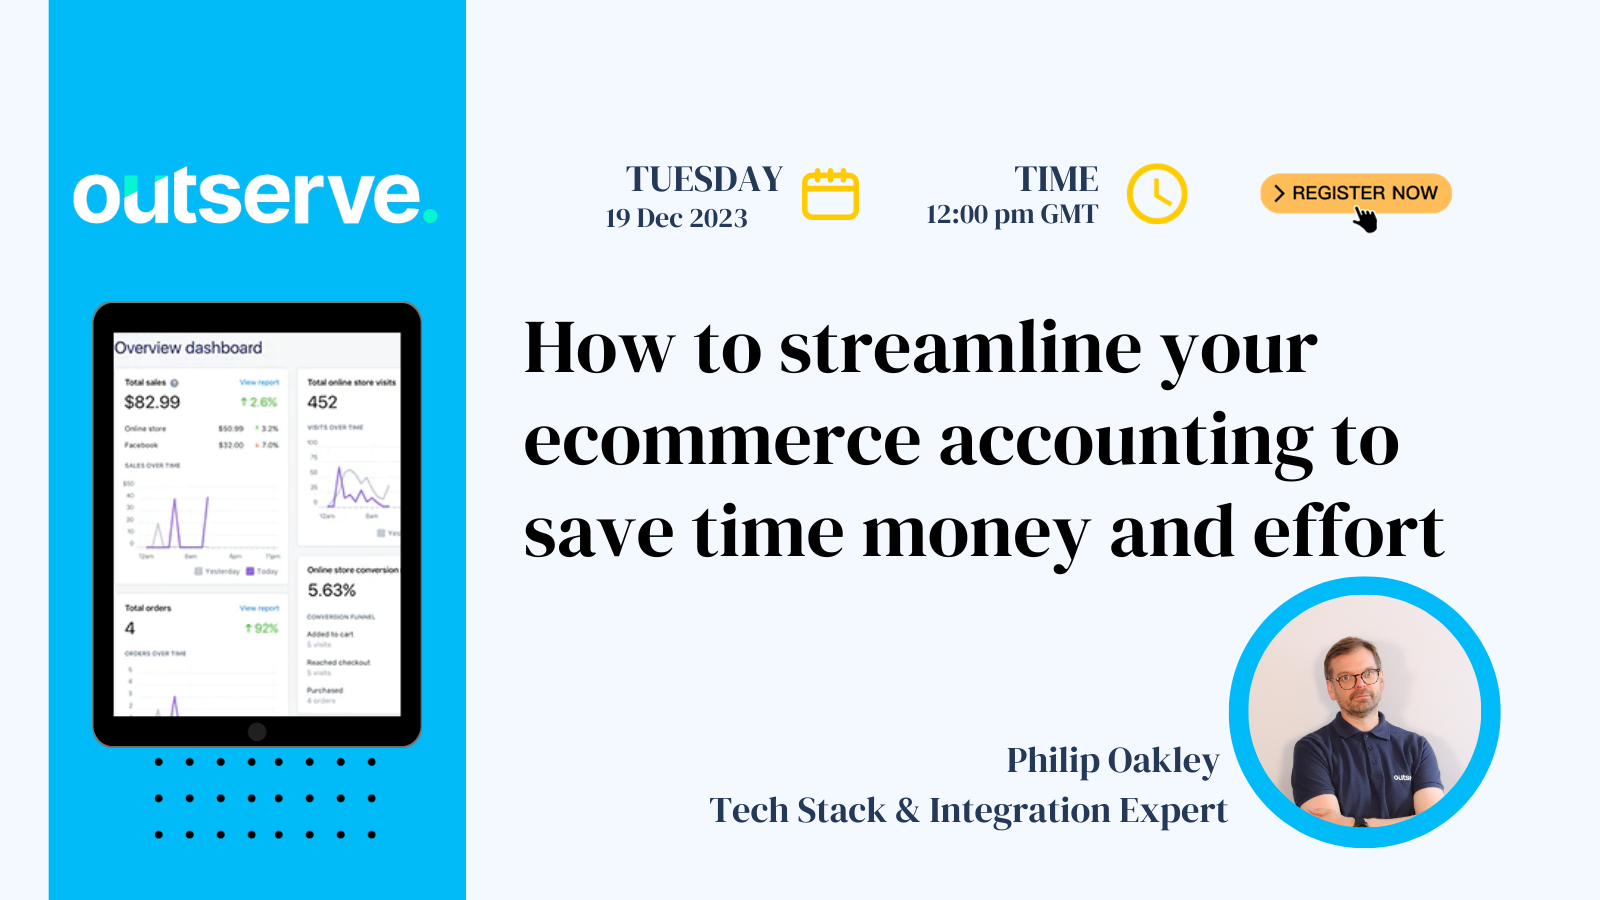 How to streamline your ecommerce accounting to save time money and effort on 19 December